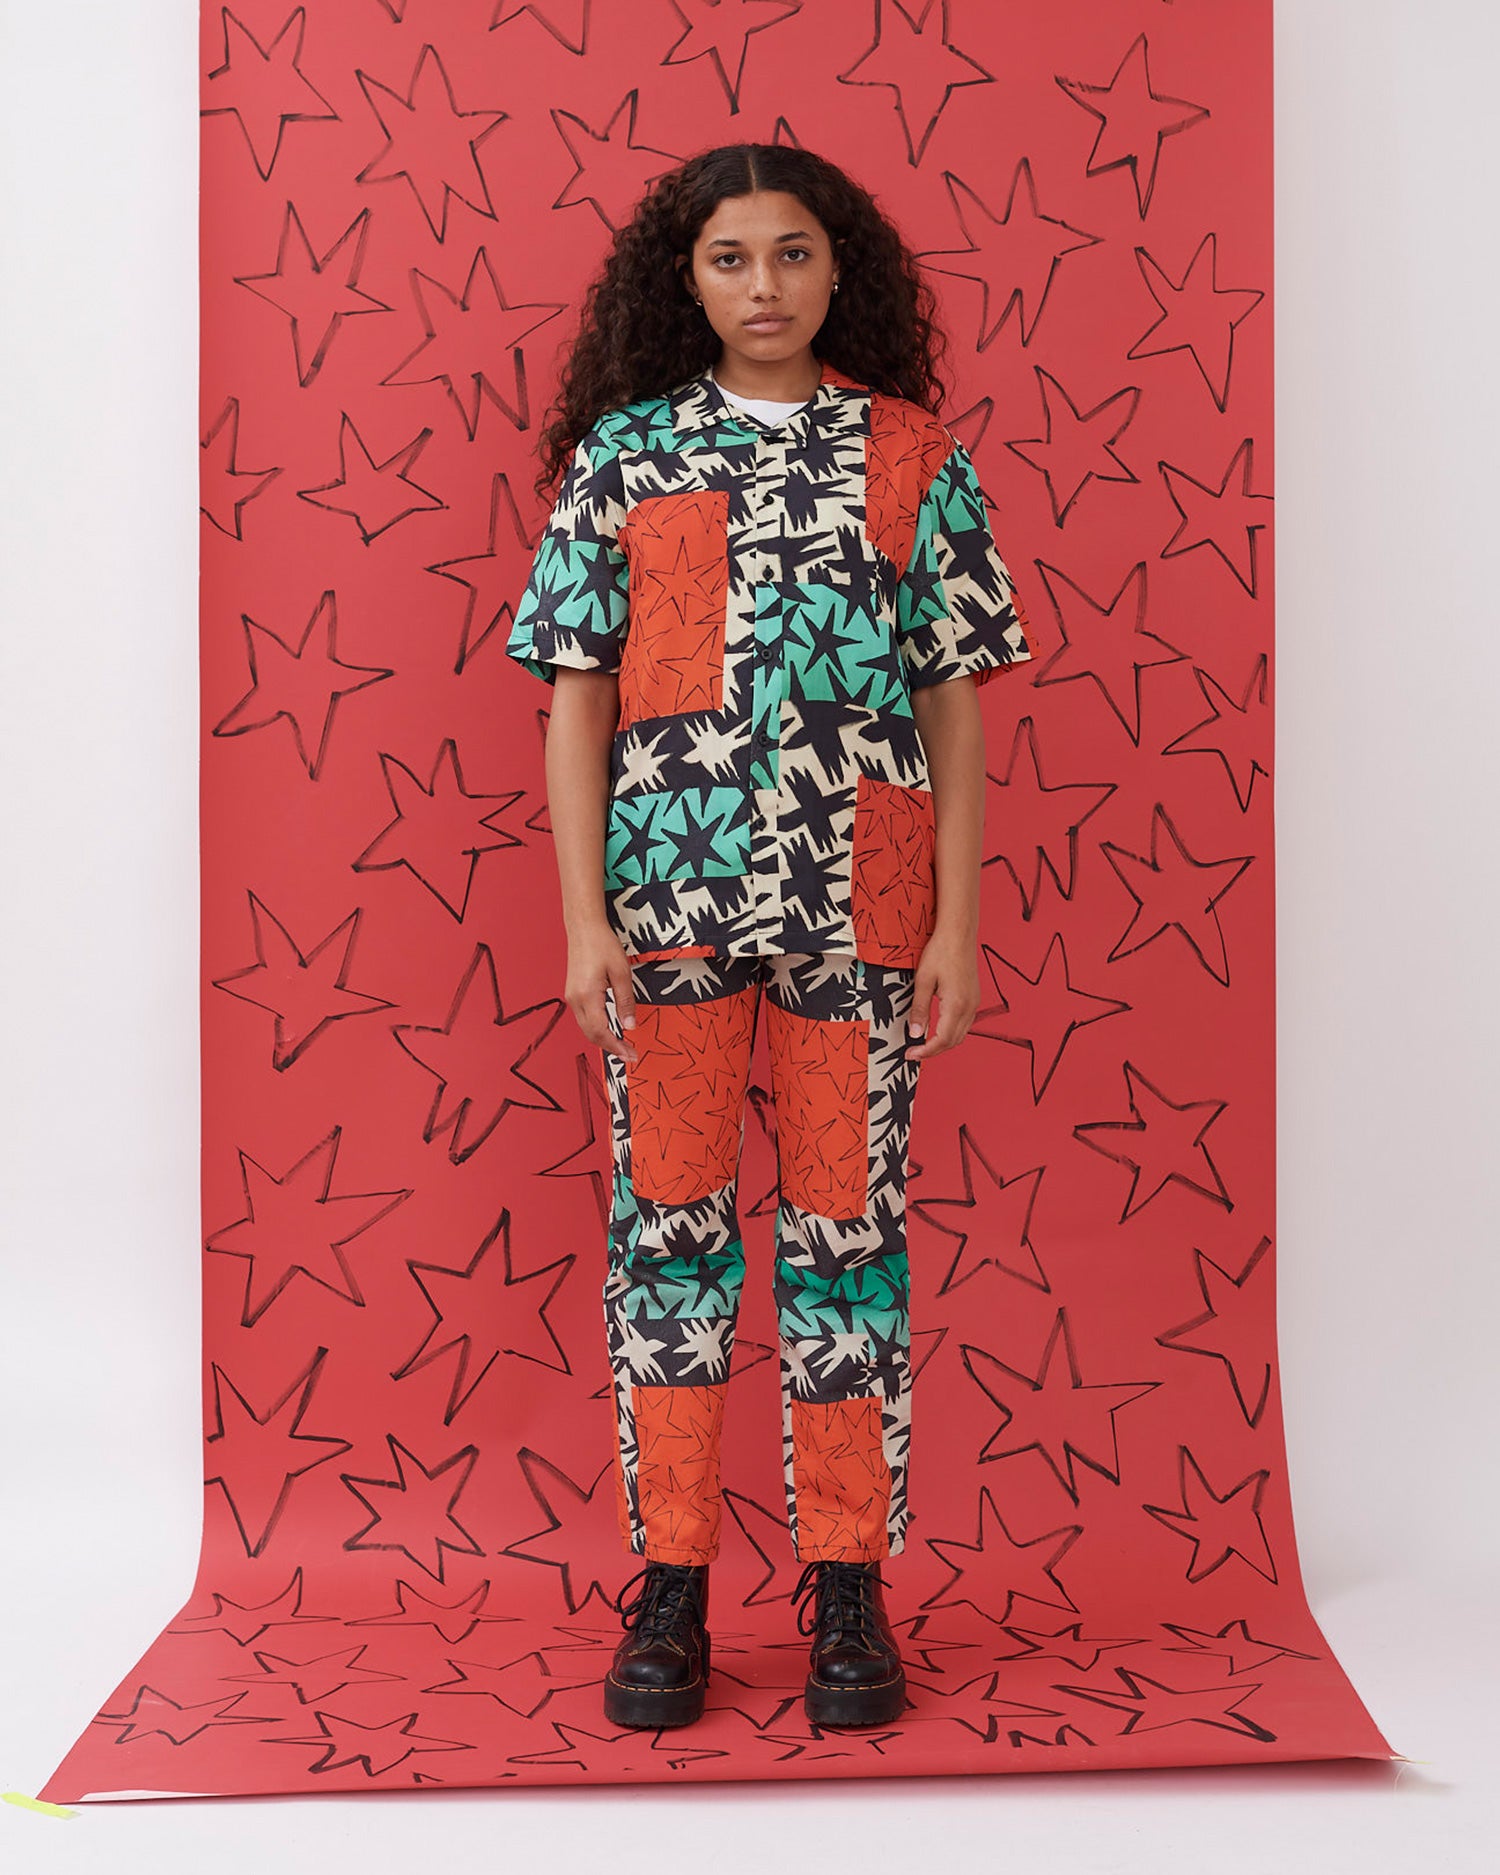 Lazy Oaf x Time to Change | Laurie Vincent & Daisy Parris